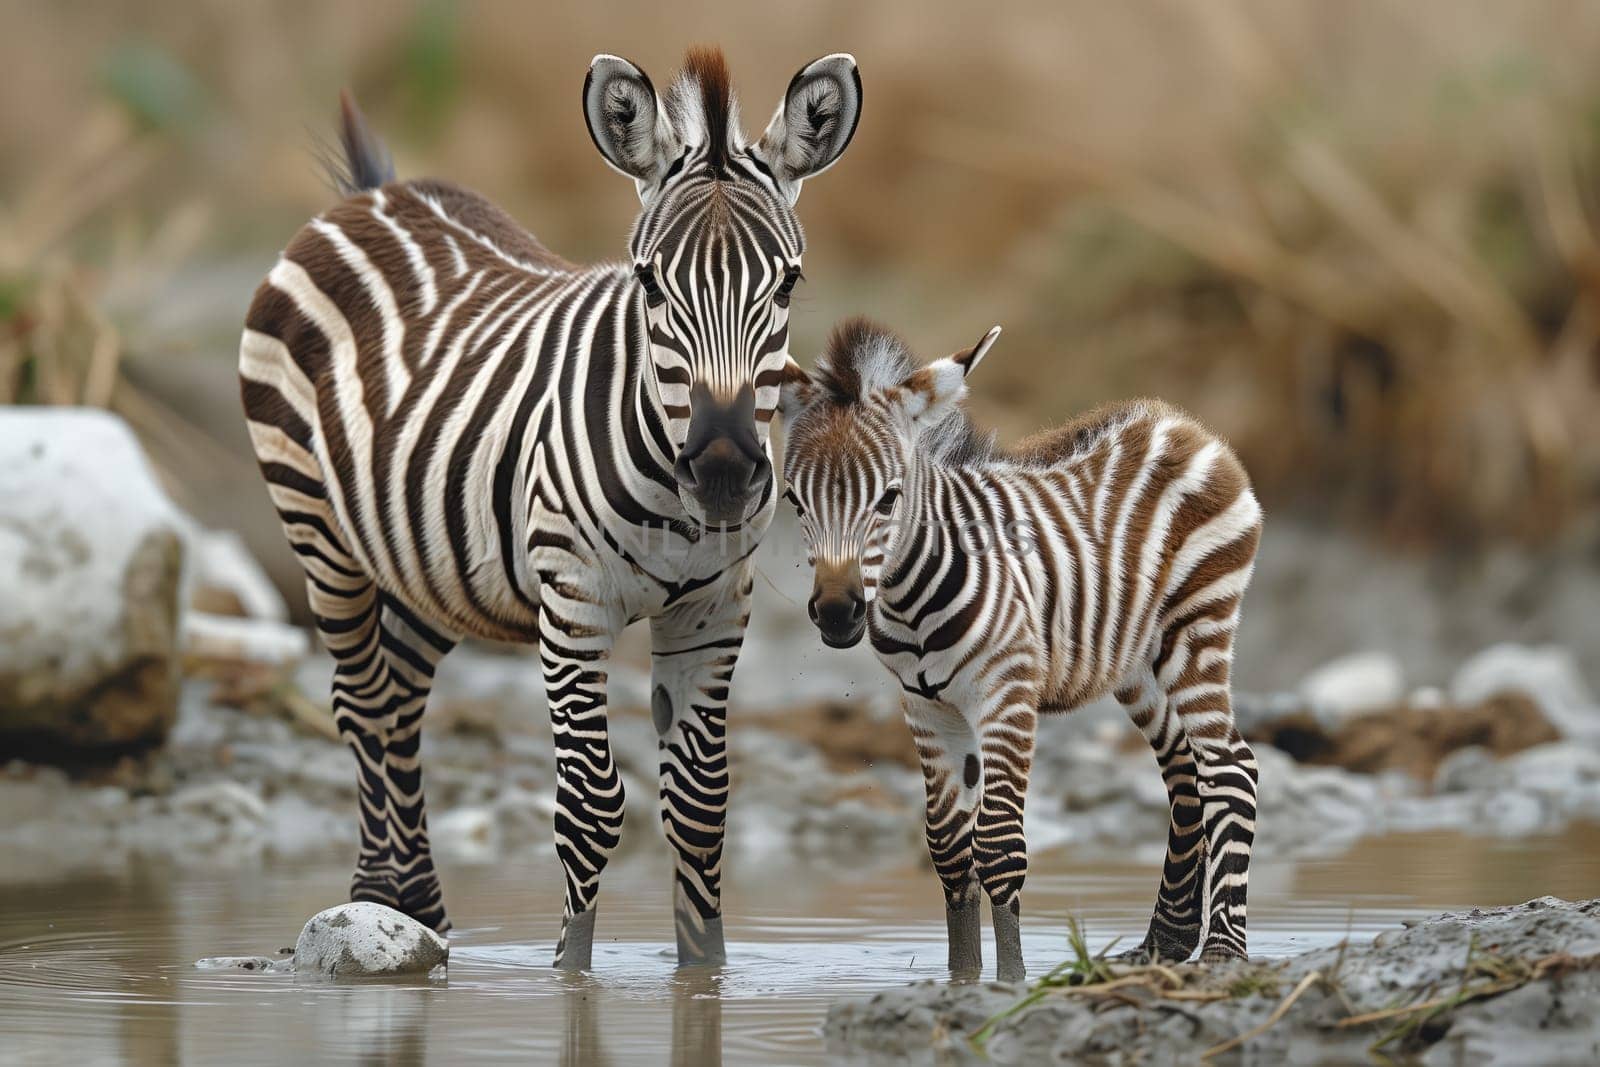 Two zebras are standing next to each other in the water, surrounded by the natural landscape of grassland. Their fluid movements showcase the beauty of these terrestrial animals